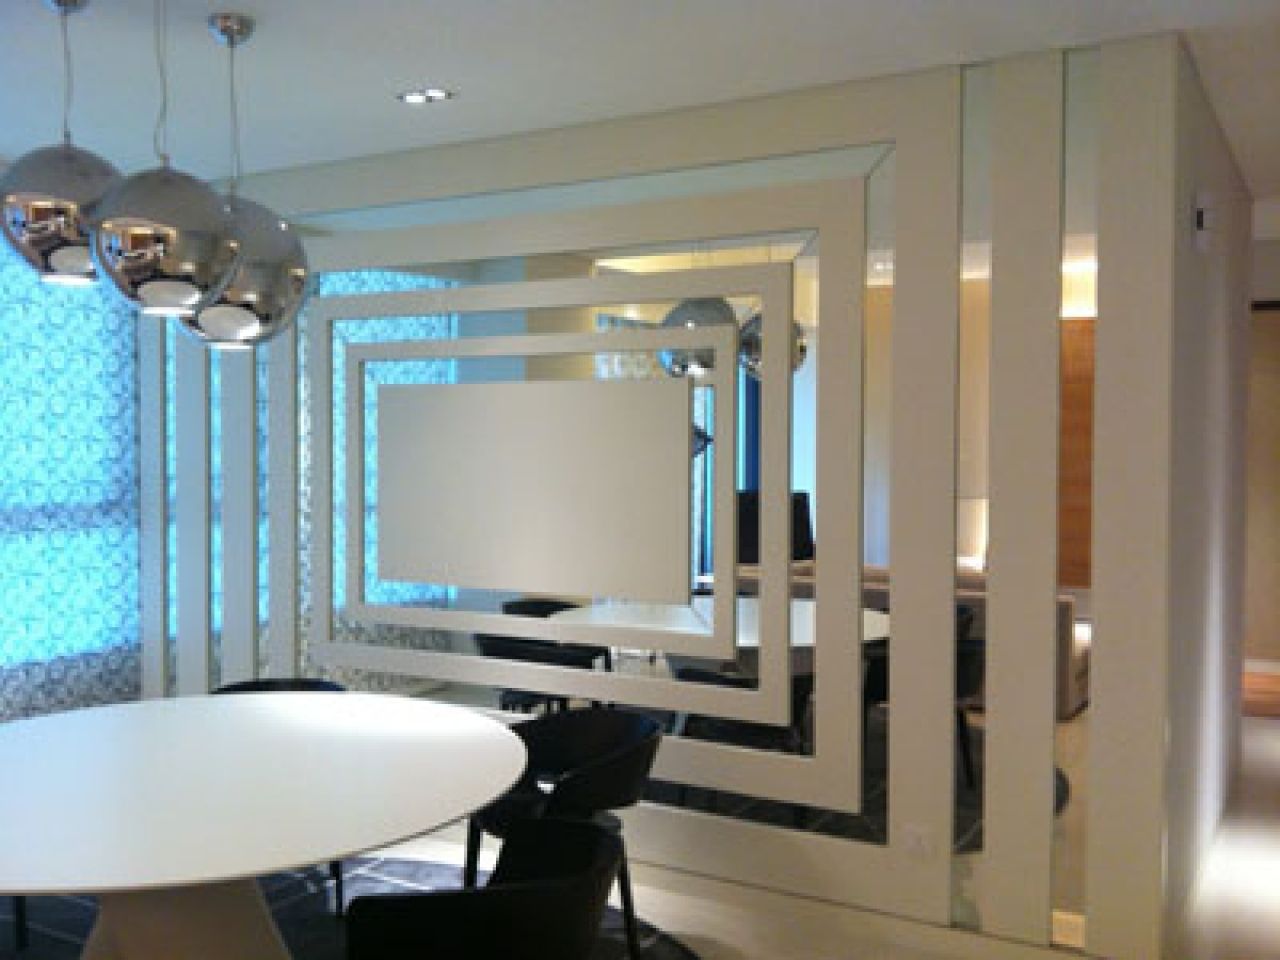 Current Kitchen Wall Mirrors Inside Wall Mirror Design Ideas Houzz 70s Mirrored Walls Picture Decoration (View 9 of 20)